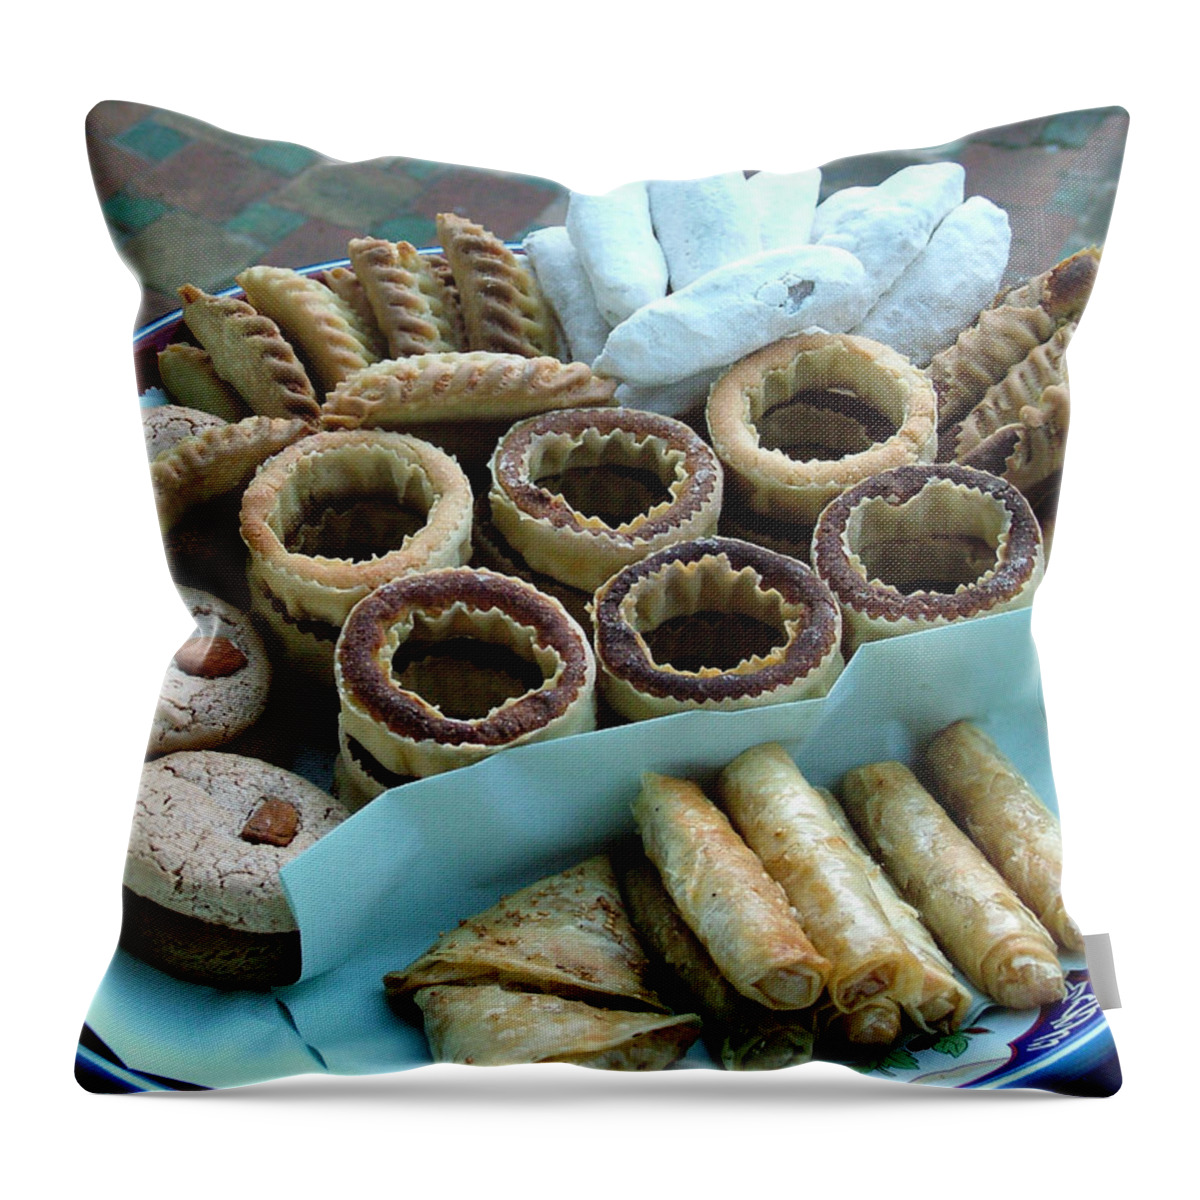 Kasbah Delights Throw Pillow featuring the photograph Kasbah Delights by Donna Corless